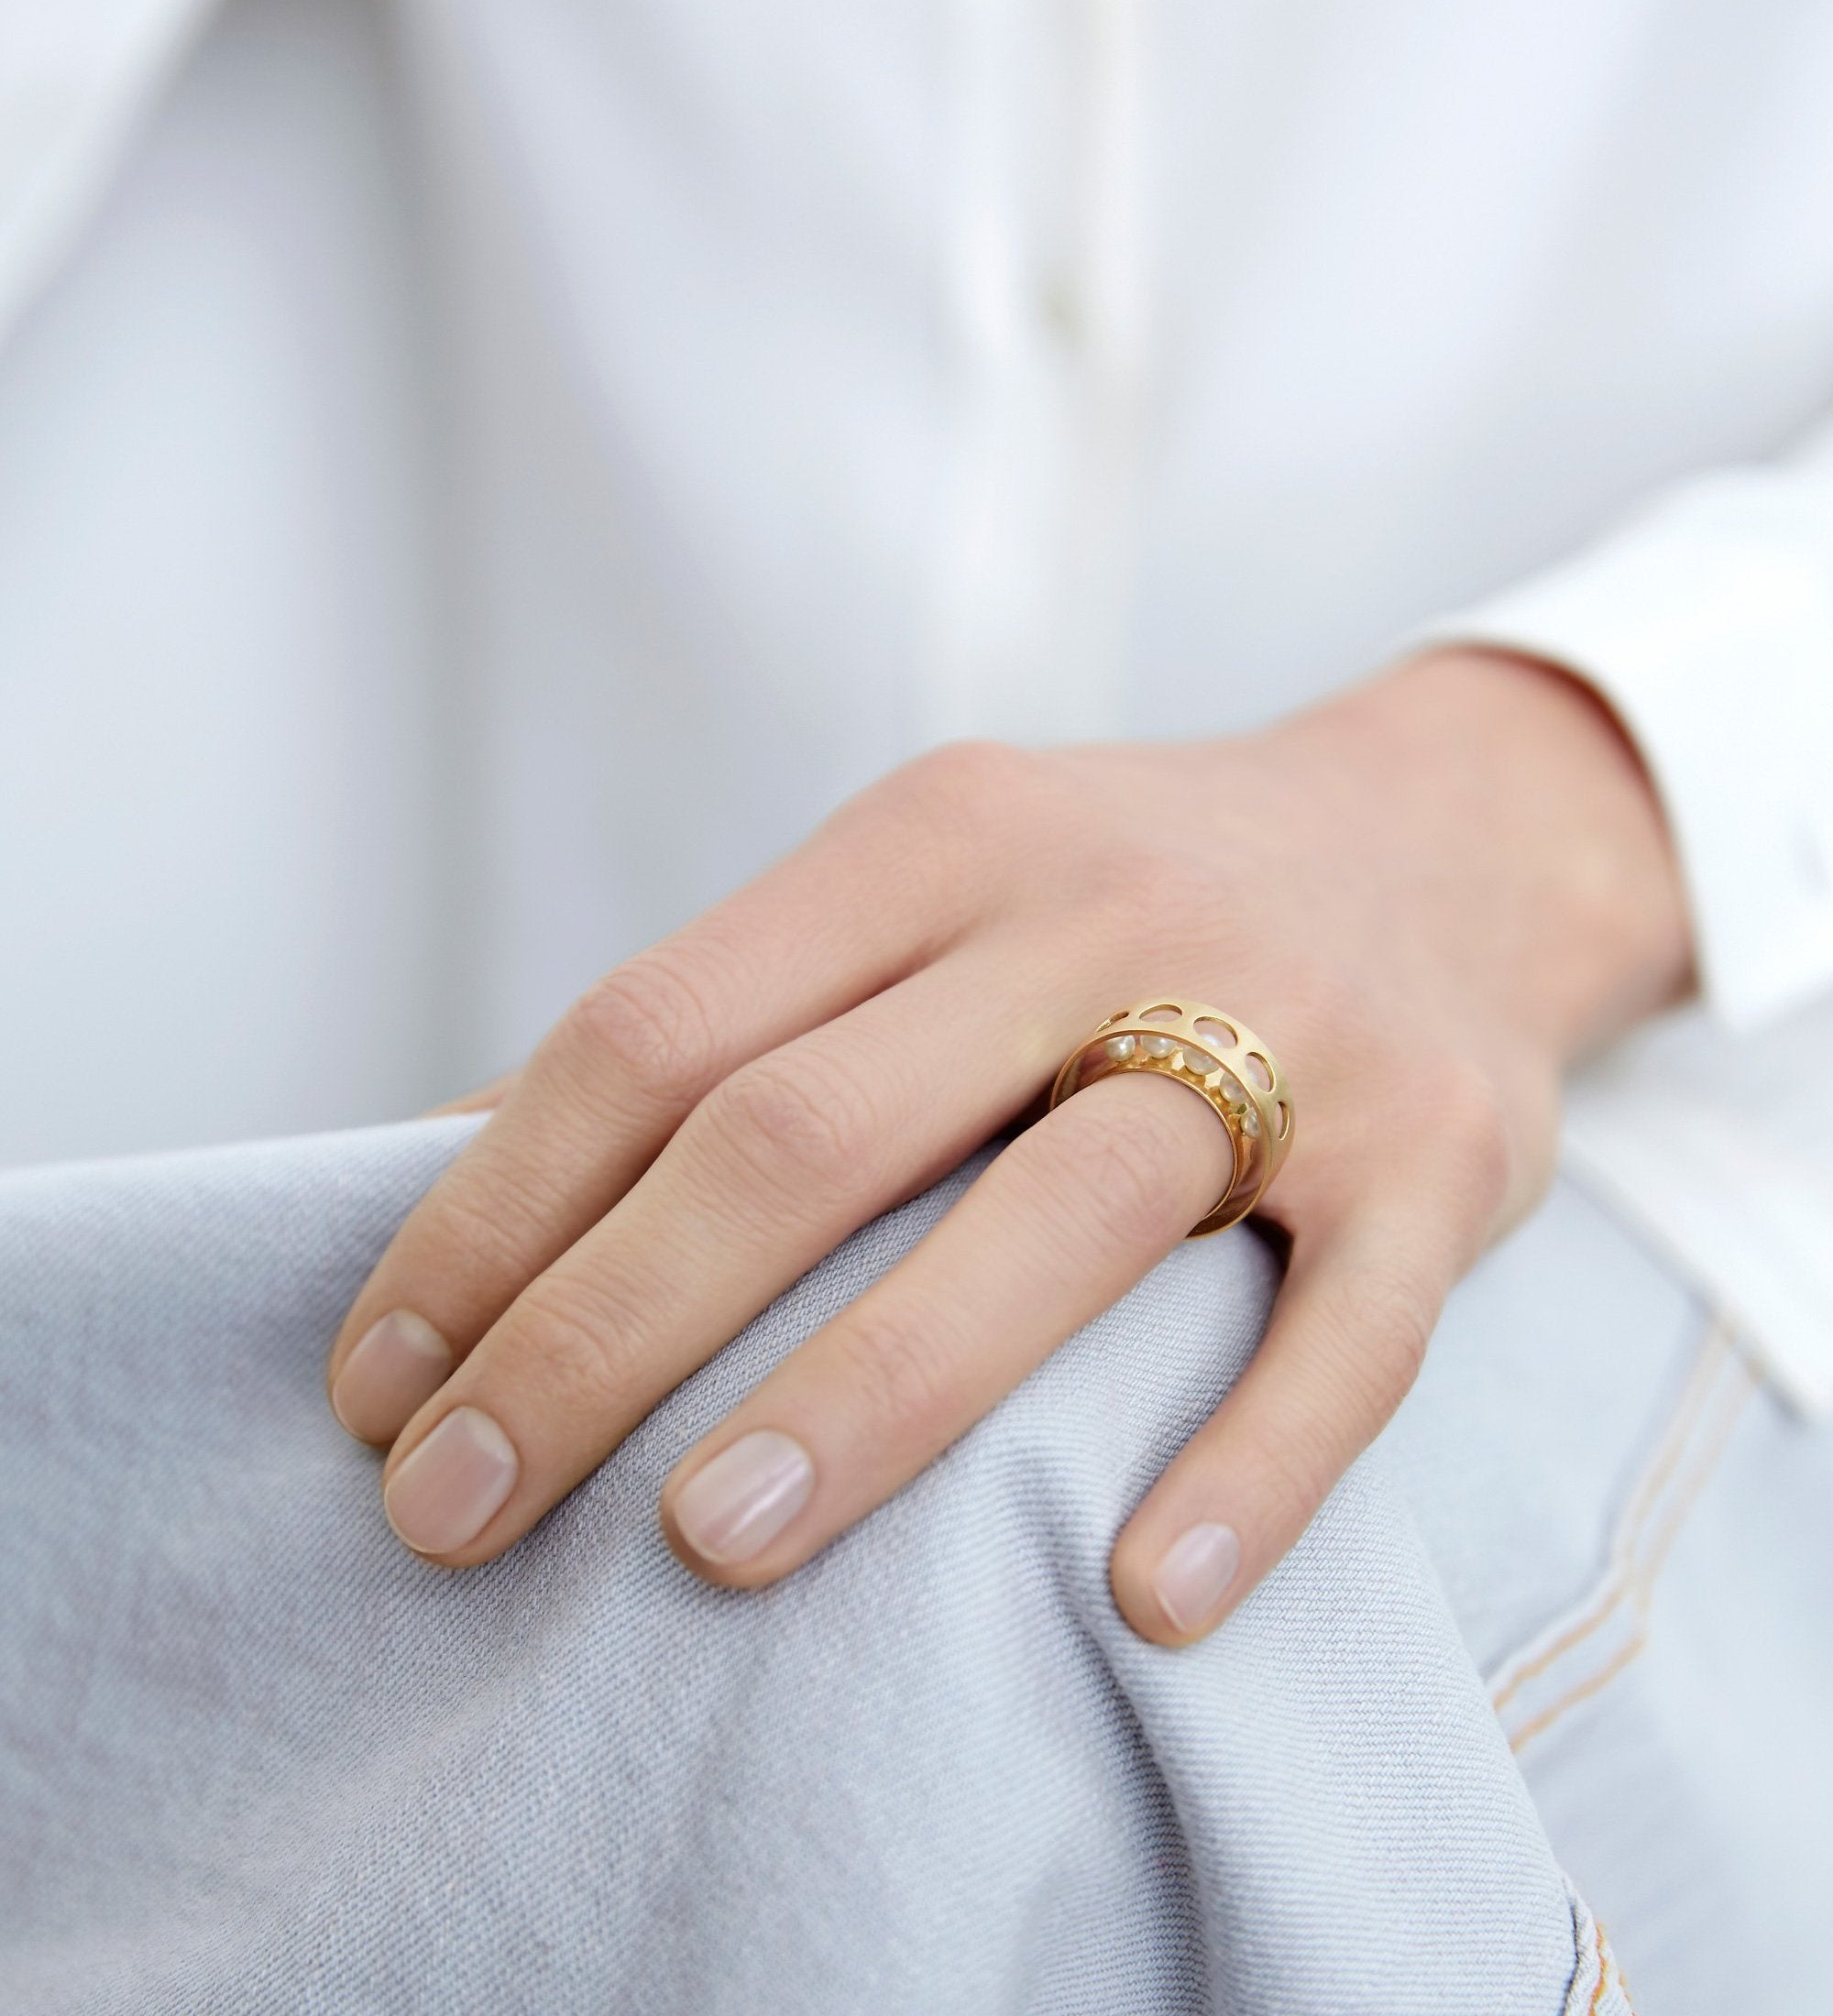 18KT Double band gold ring with akoya pearls (diameter 3-3,5-4 MM) worn by a female hand - Trasparenze R